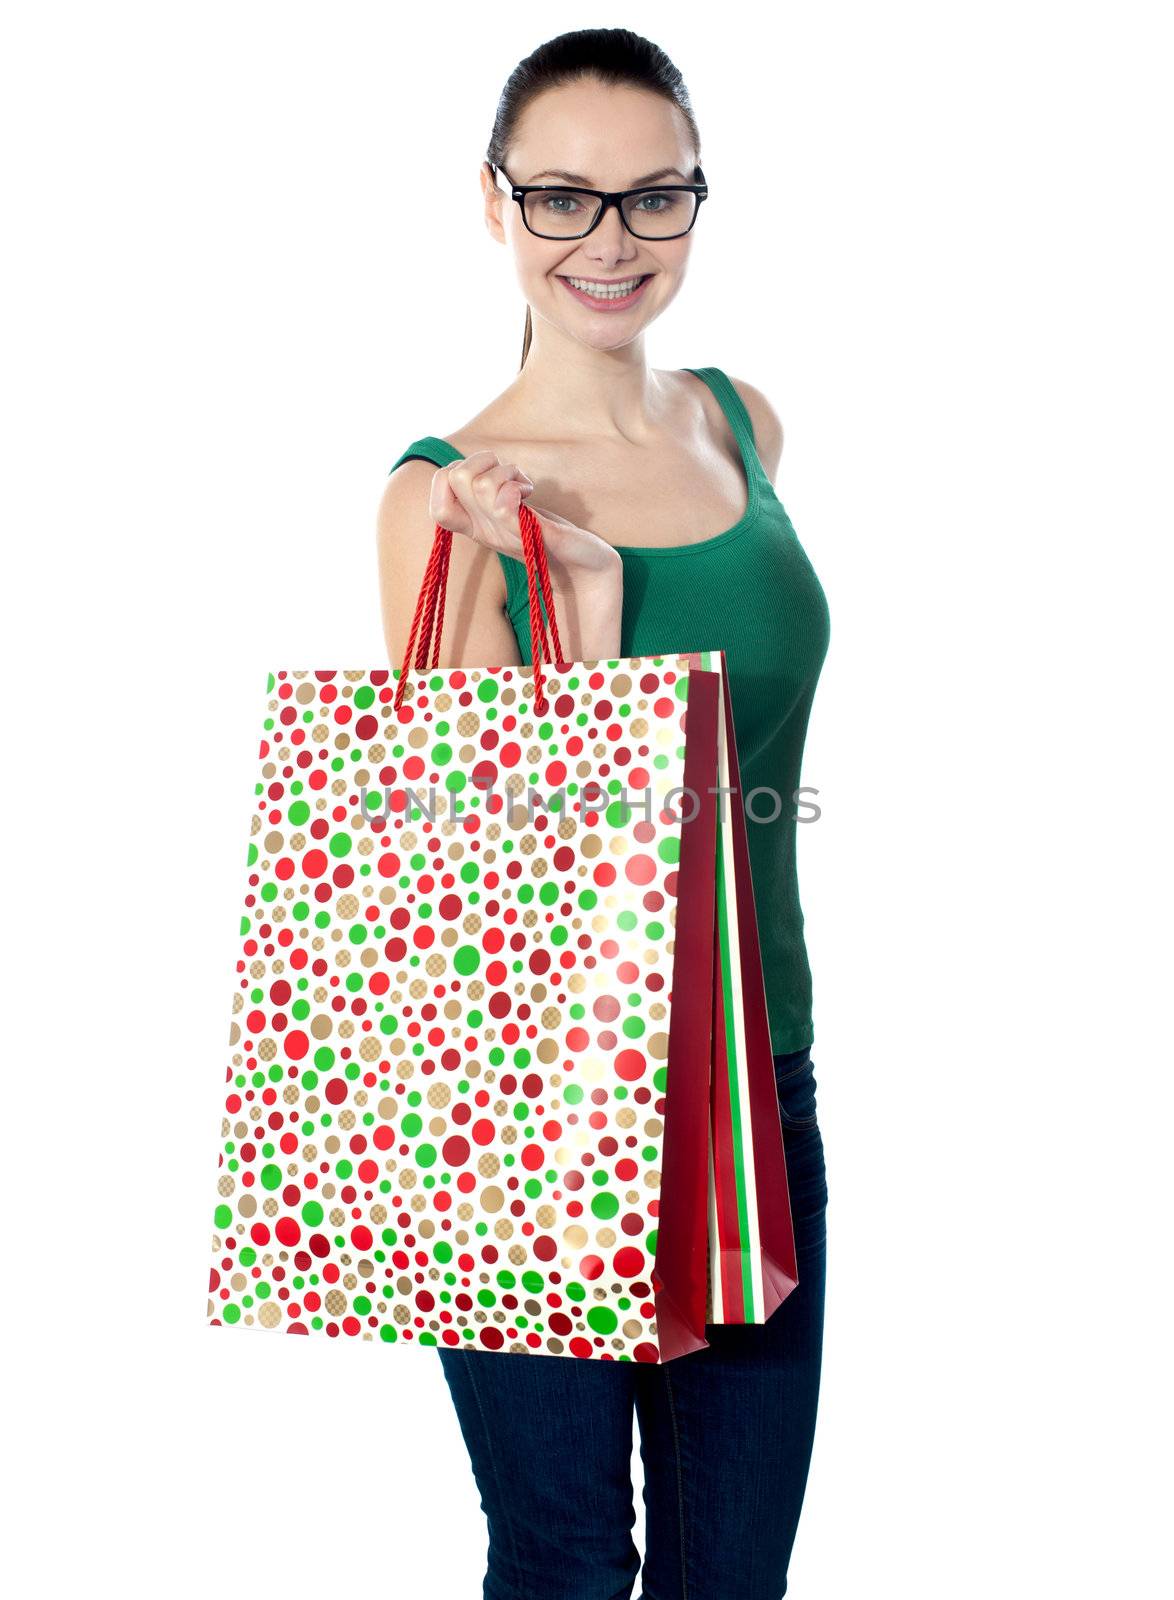 Glamorous young girl carrying shopping bags isolated over white